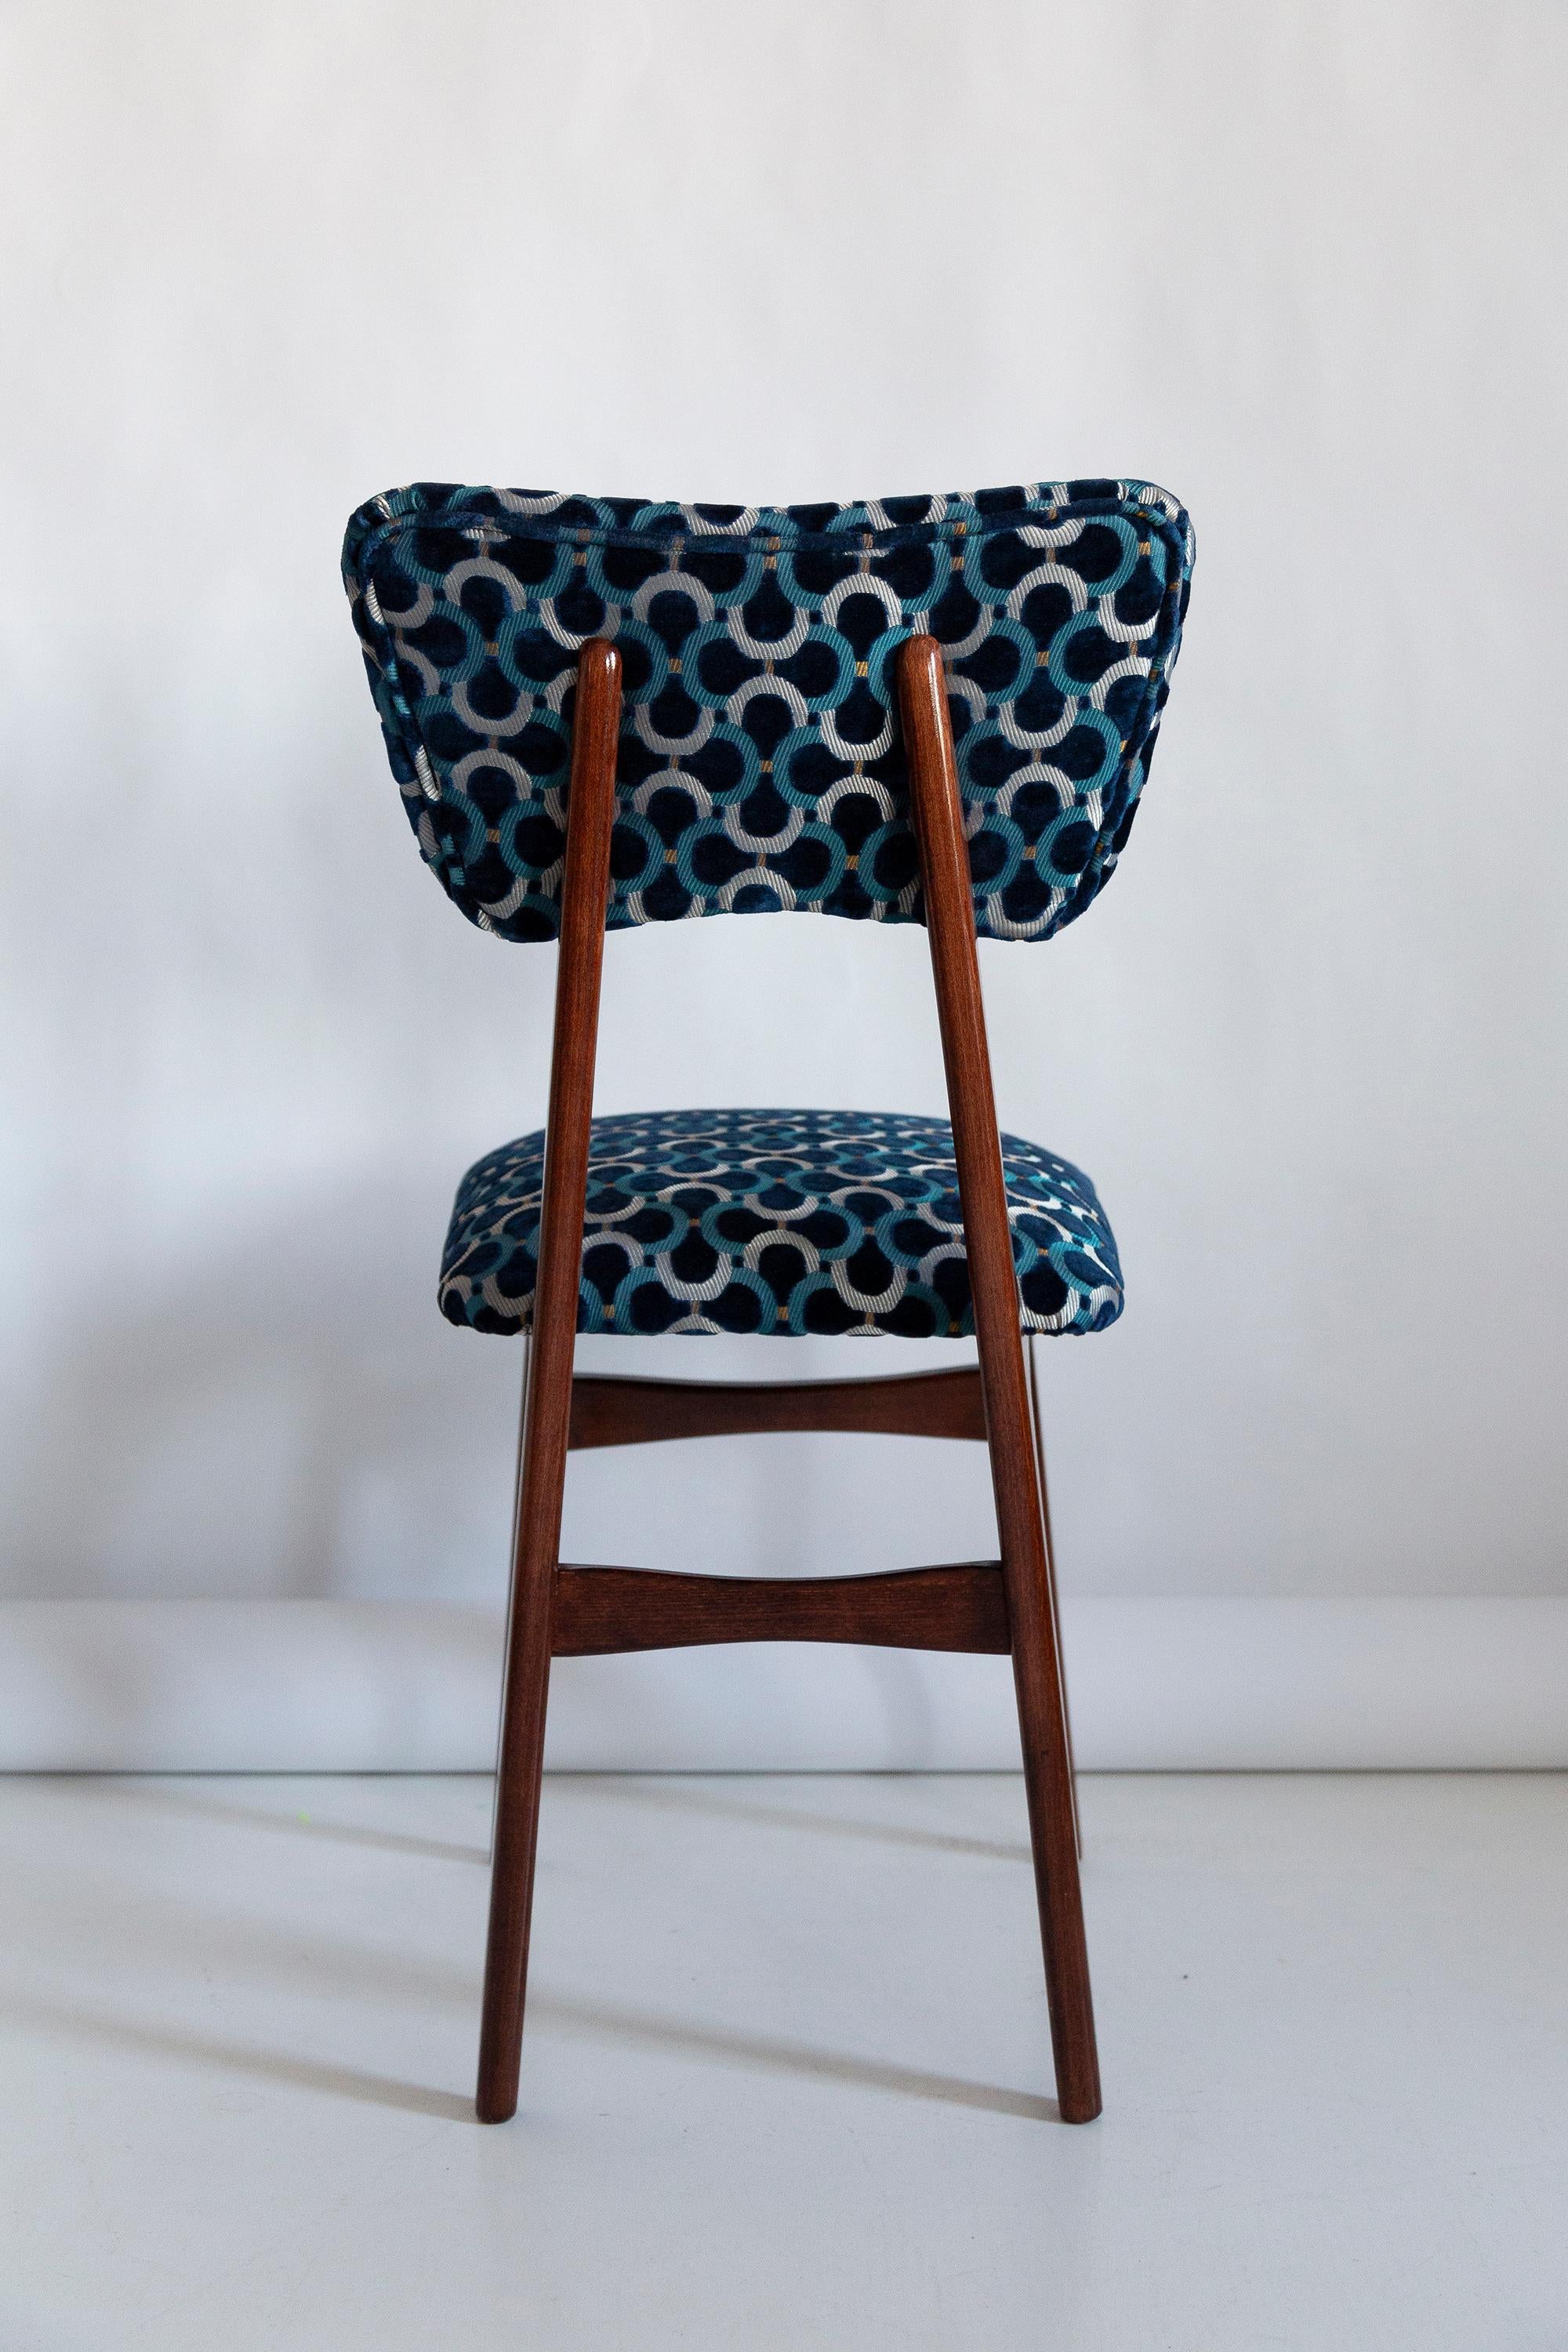 Fabric Ten Mid Century Butterfly Chairs, Blue Scarabeo Velvet, Dark Wood, Europe, 1960s For Sale